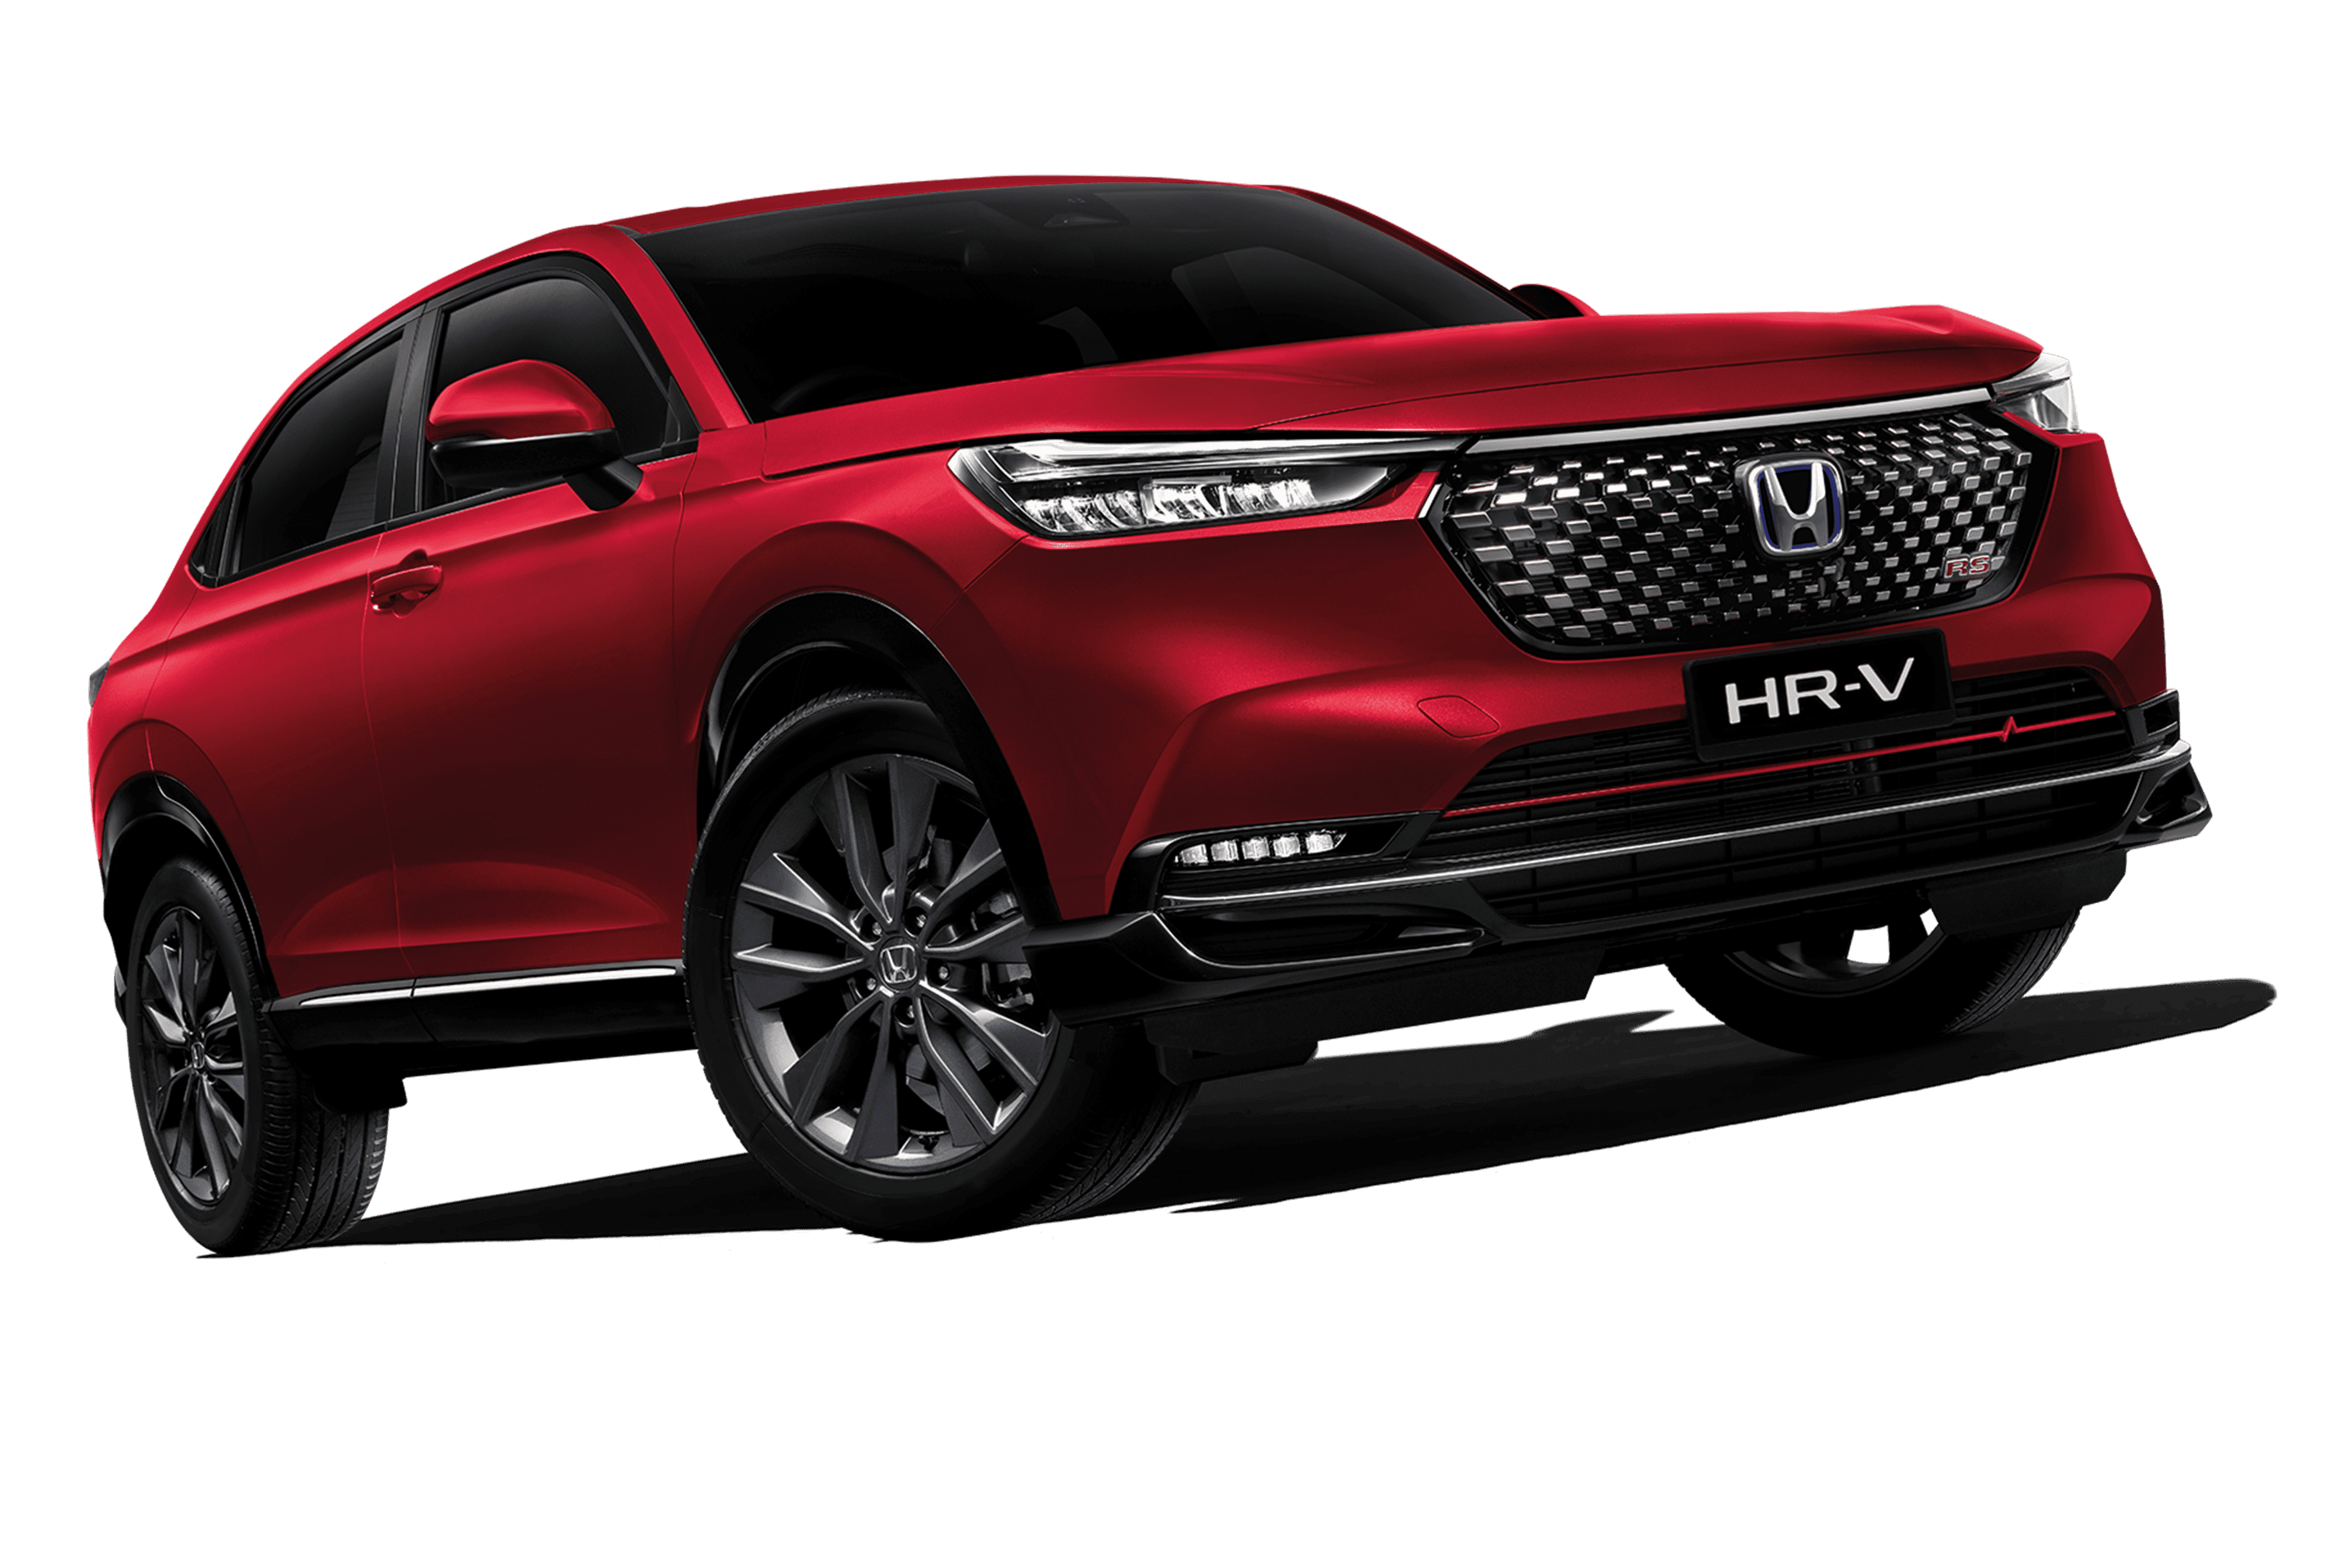 2022 Third Gen Honda HRV Vs Second Gen All You Need to Know